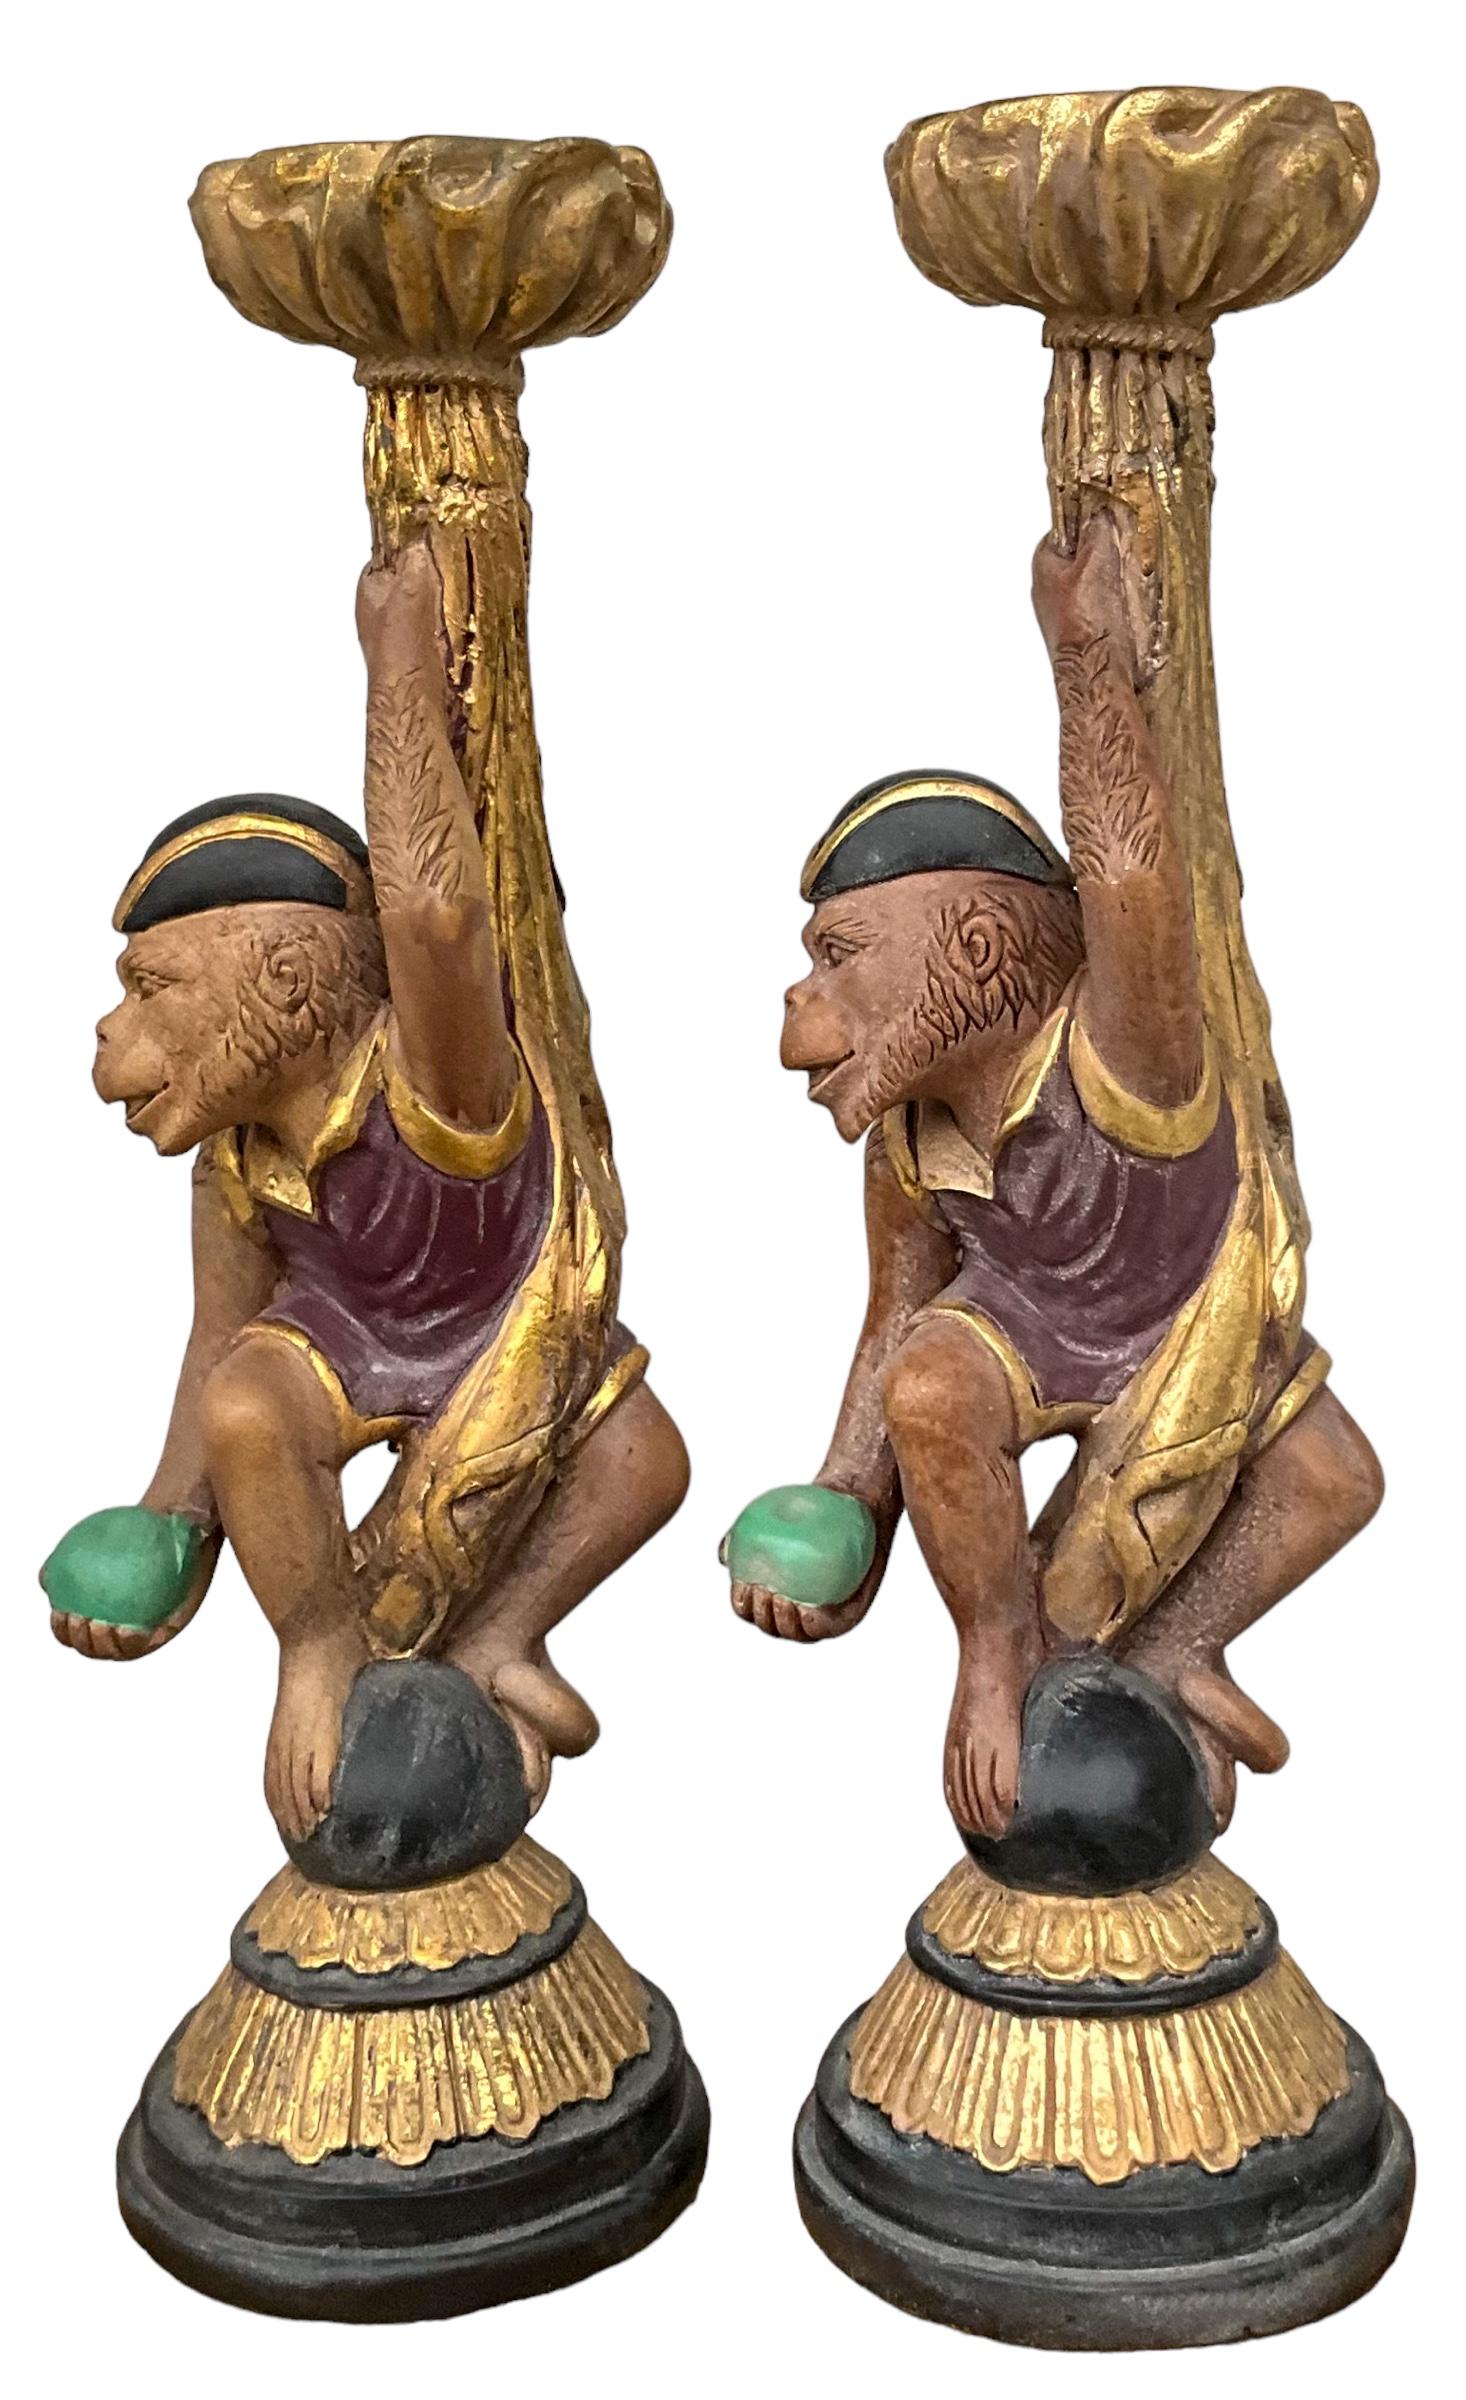 20th Century Large Regency Style Gilt Monkey Form Candle Holders Att. Maitland-Smith - Pair For Sale